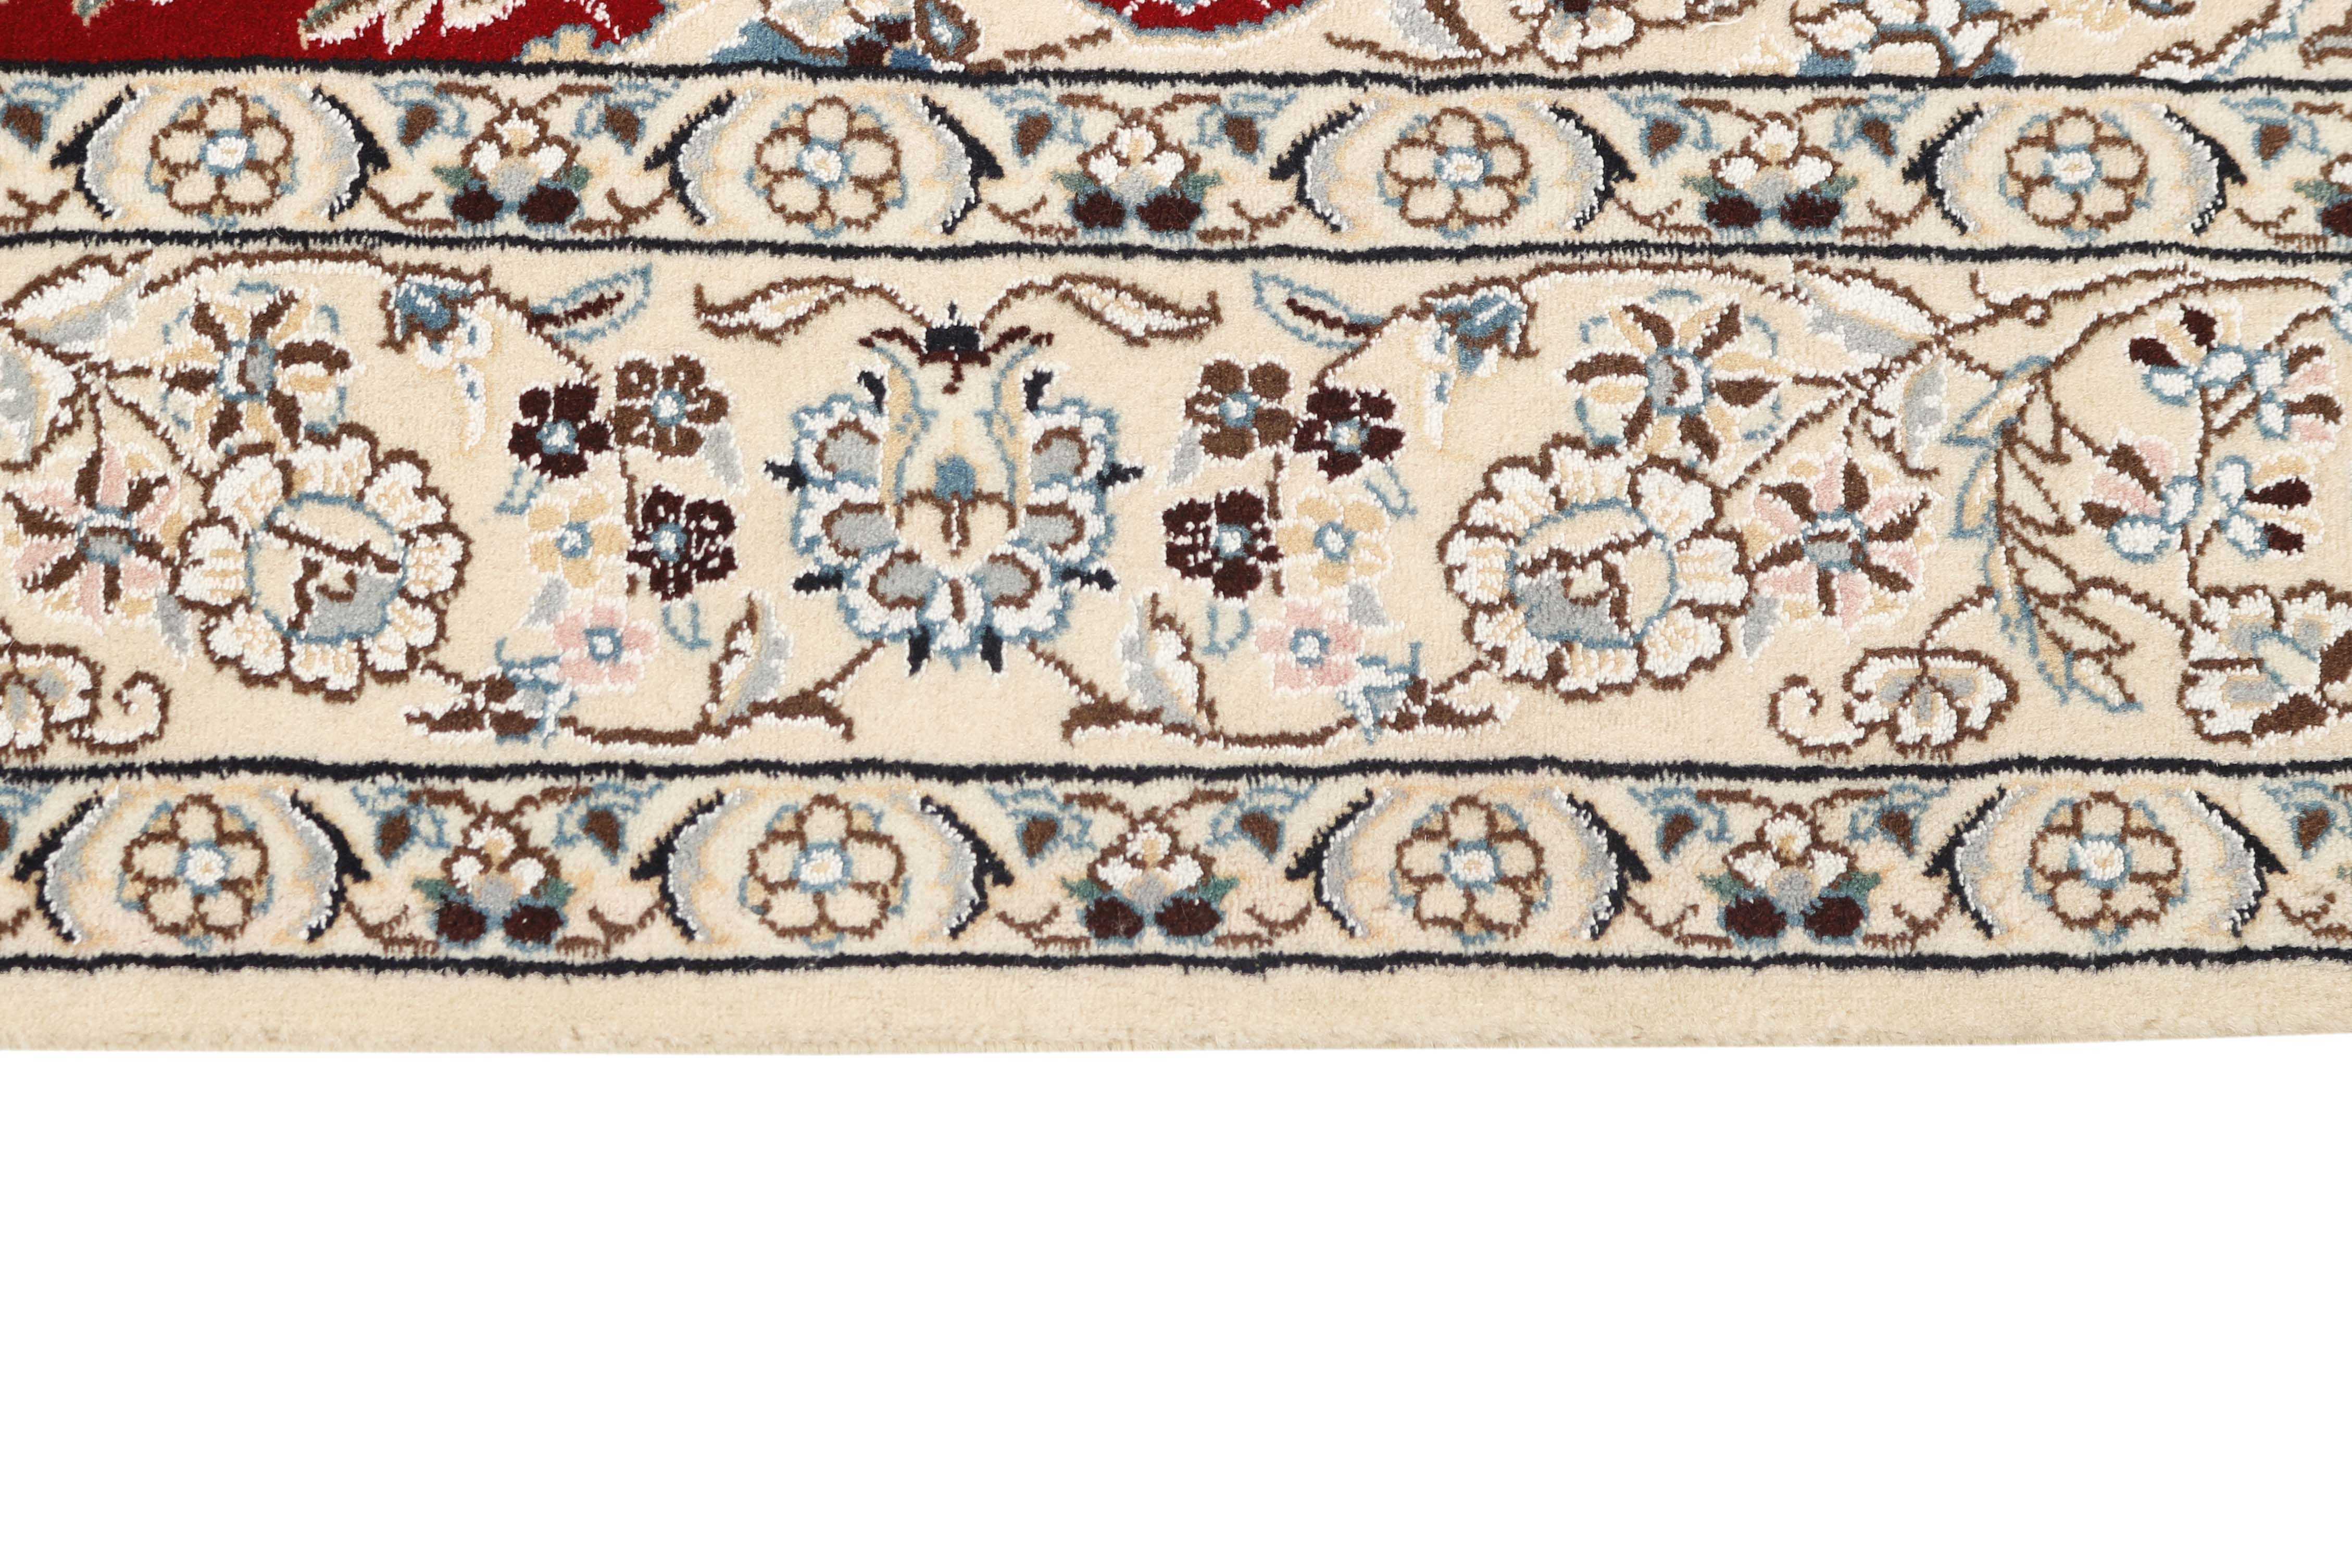 Authentic oriental rug with traditional floral design in beige